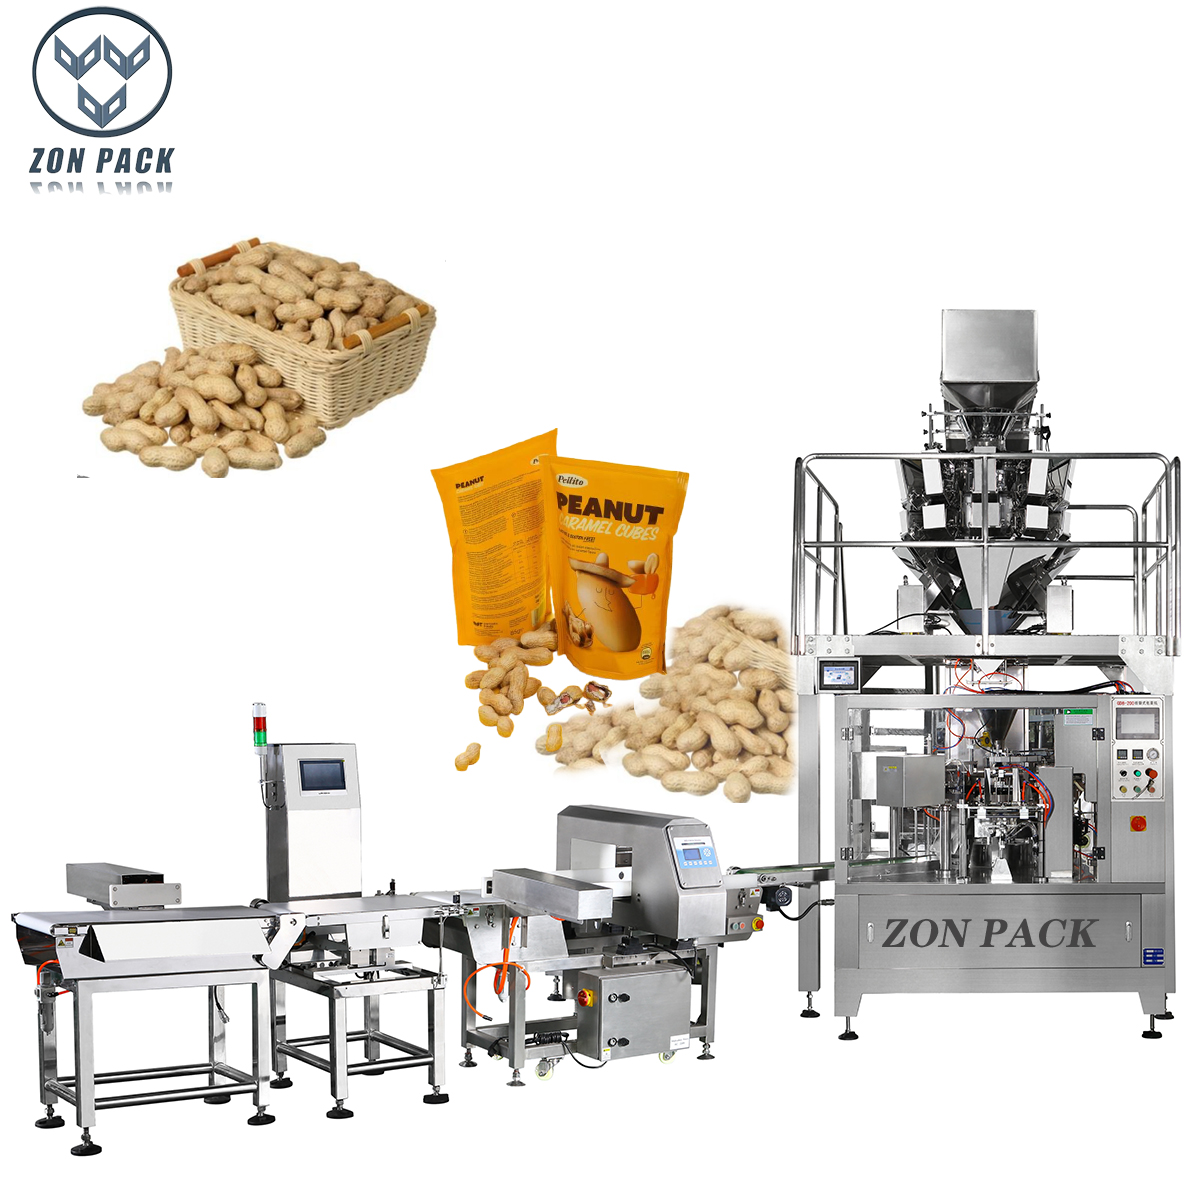 Wheat Flour Packing Machine Product: Complete Guide